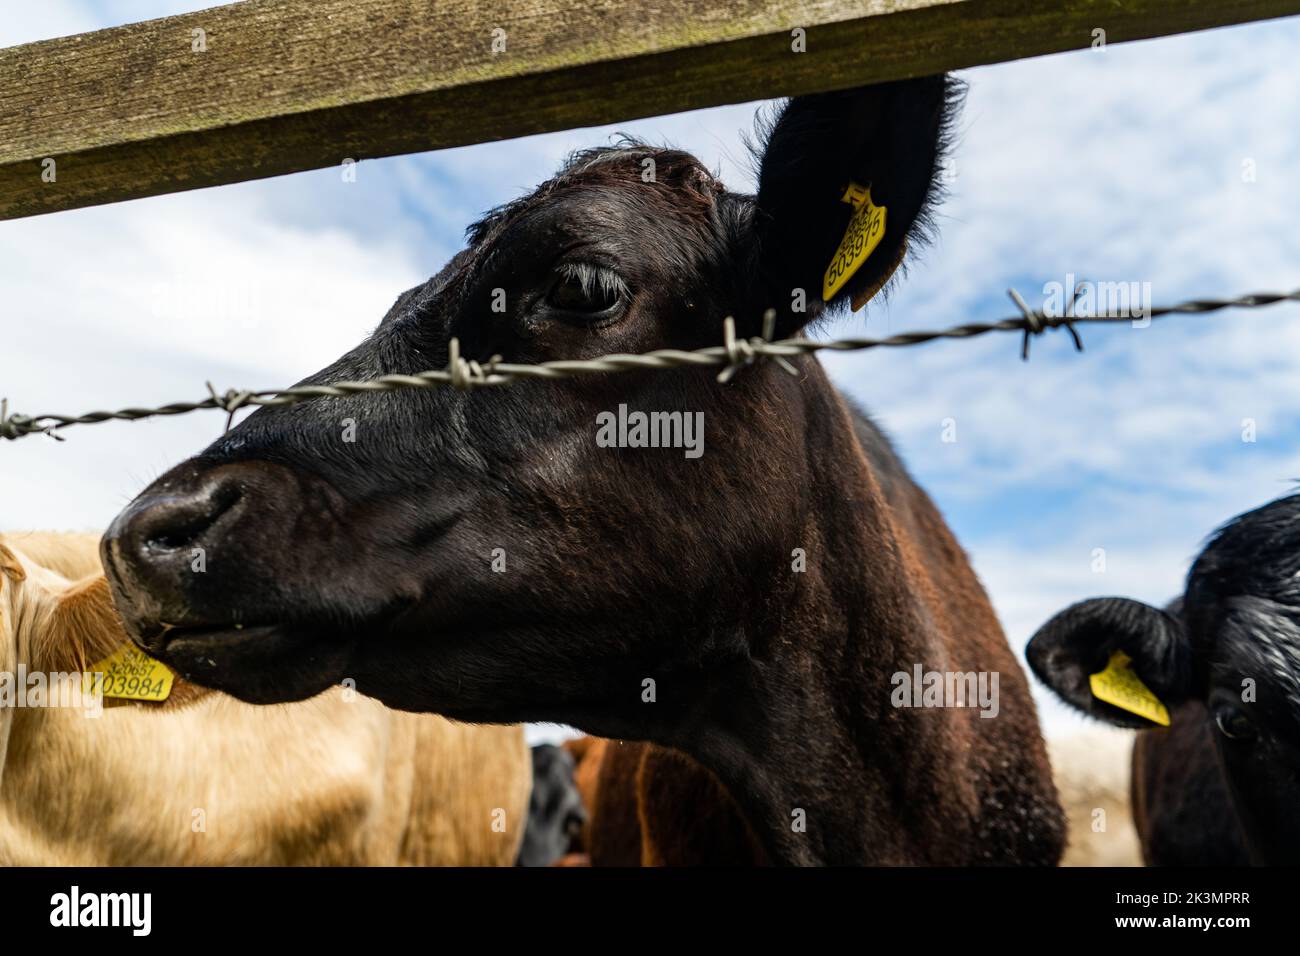 Black young bull curiously coming closer and looking into the camera, cute cow face in closeup. Livestock grazing on the field in summer. Stock Photo